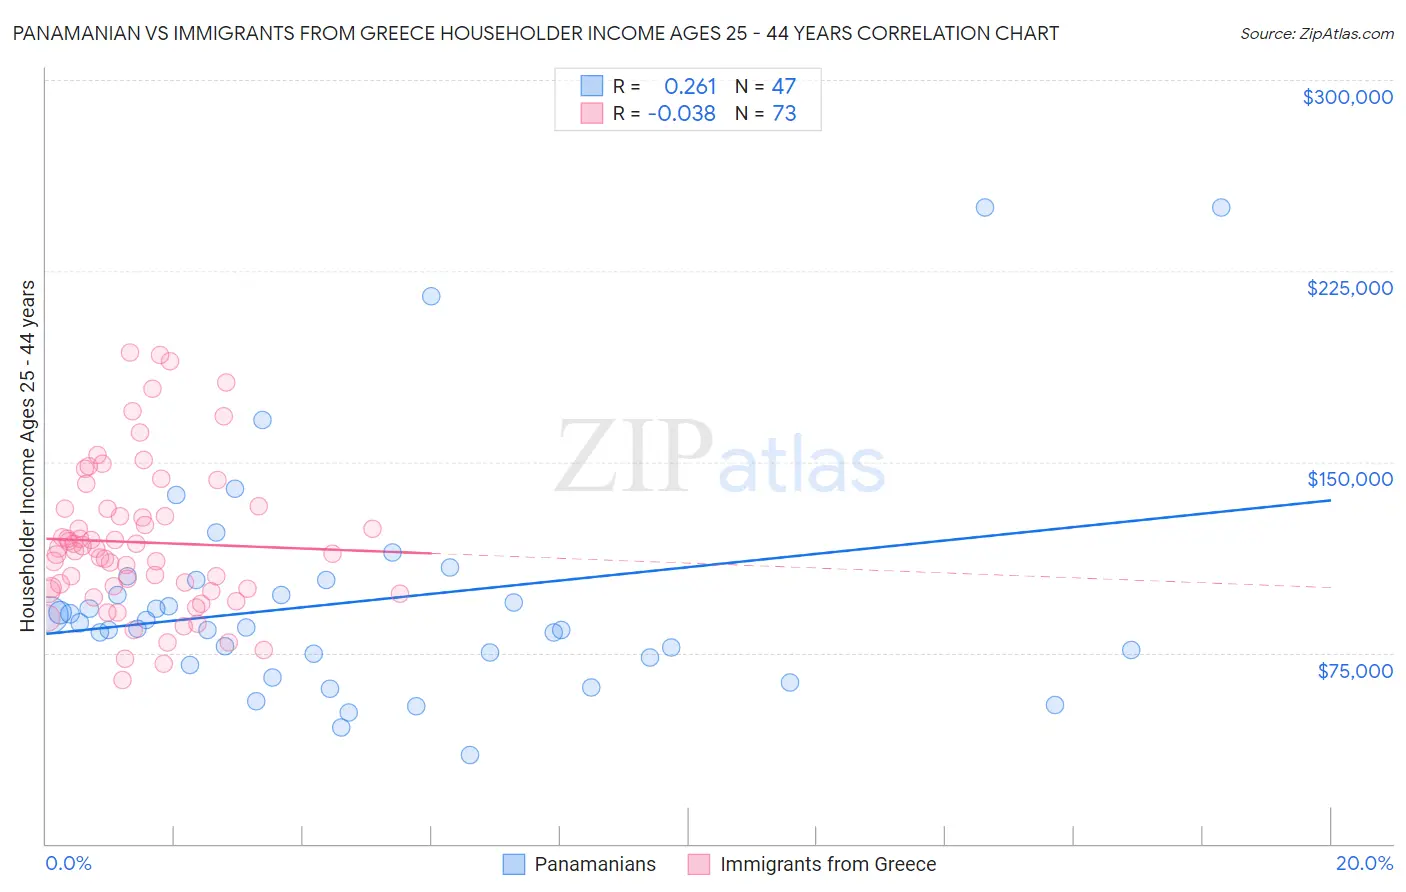 Panamanian vs Immigrants from Greece Householder Income Ages 25 - 44 years